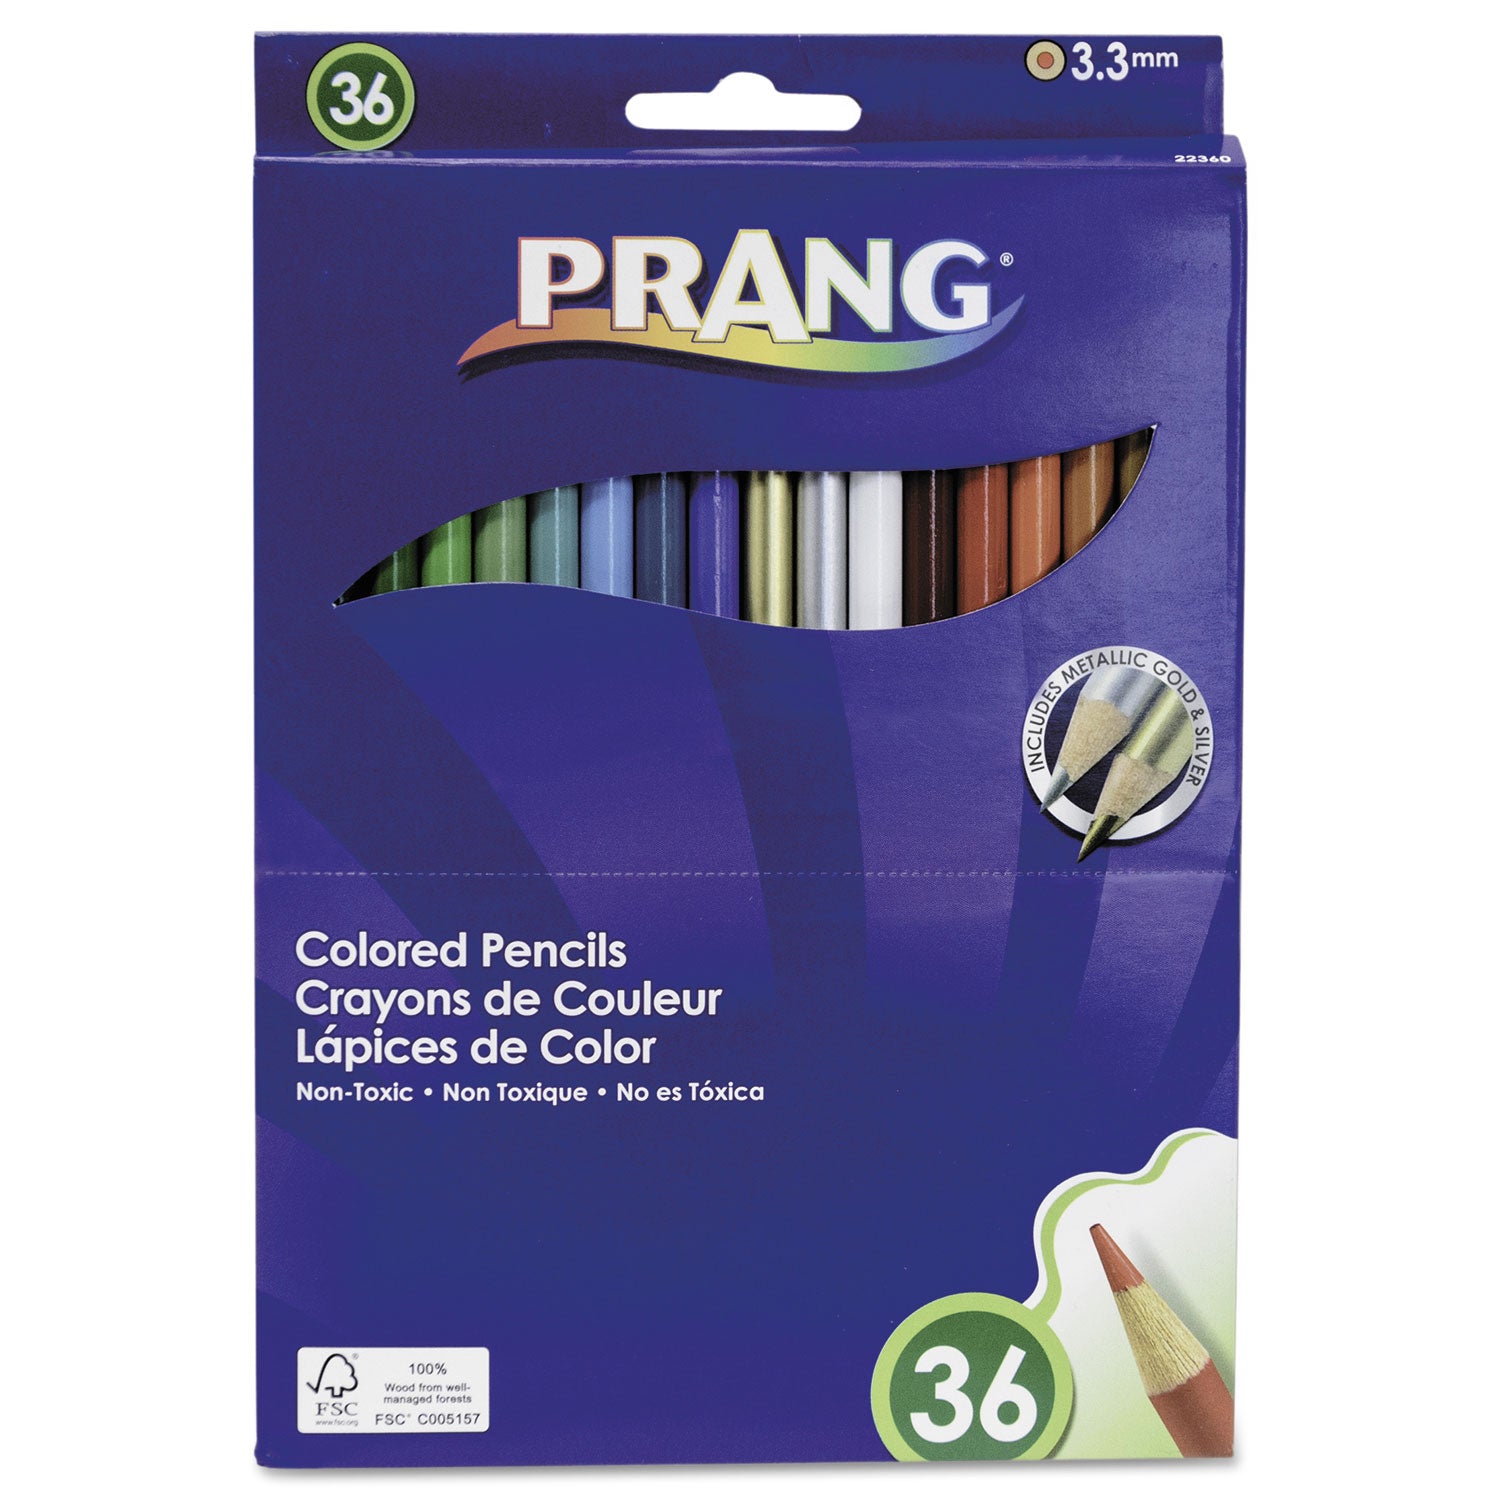 Colored Pencil Sets, 3.3 mm, 2B, Assorted Lead and Barrel Colors, 36/Pack - 